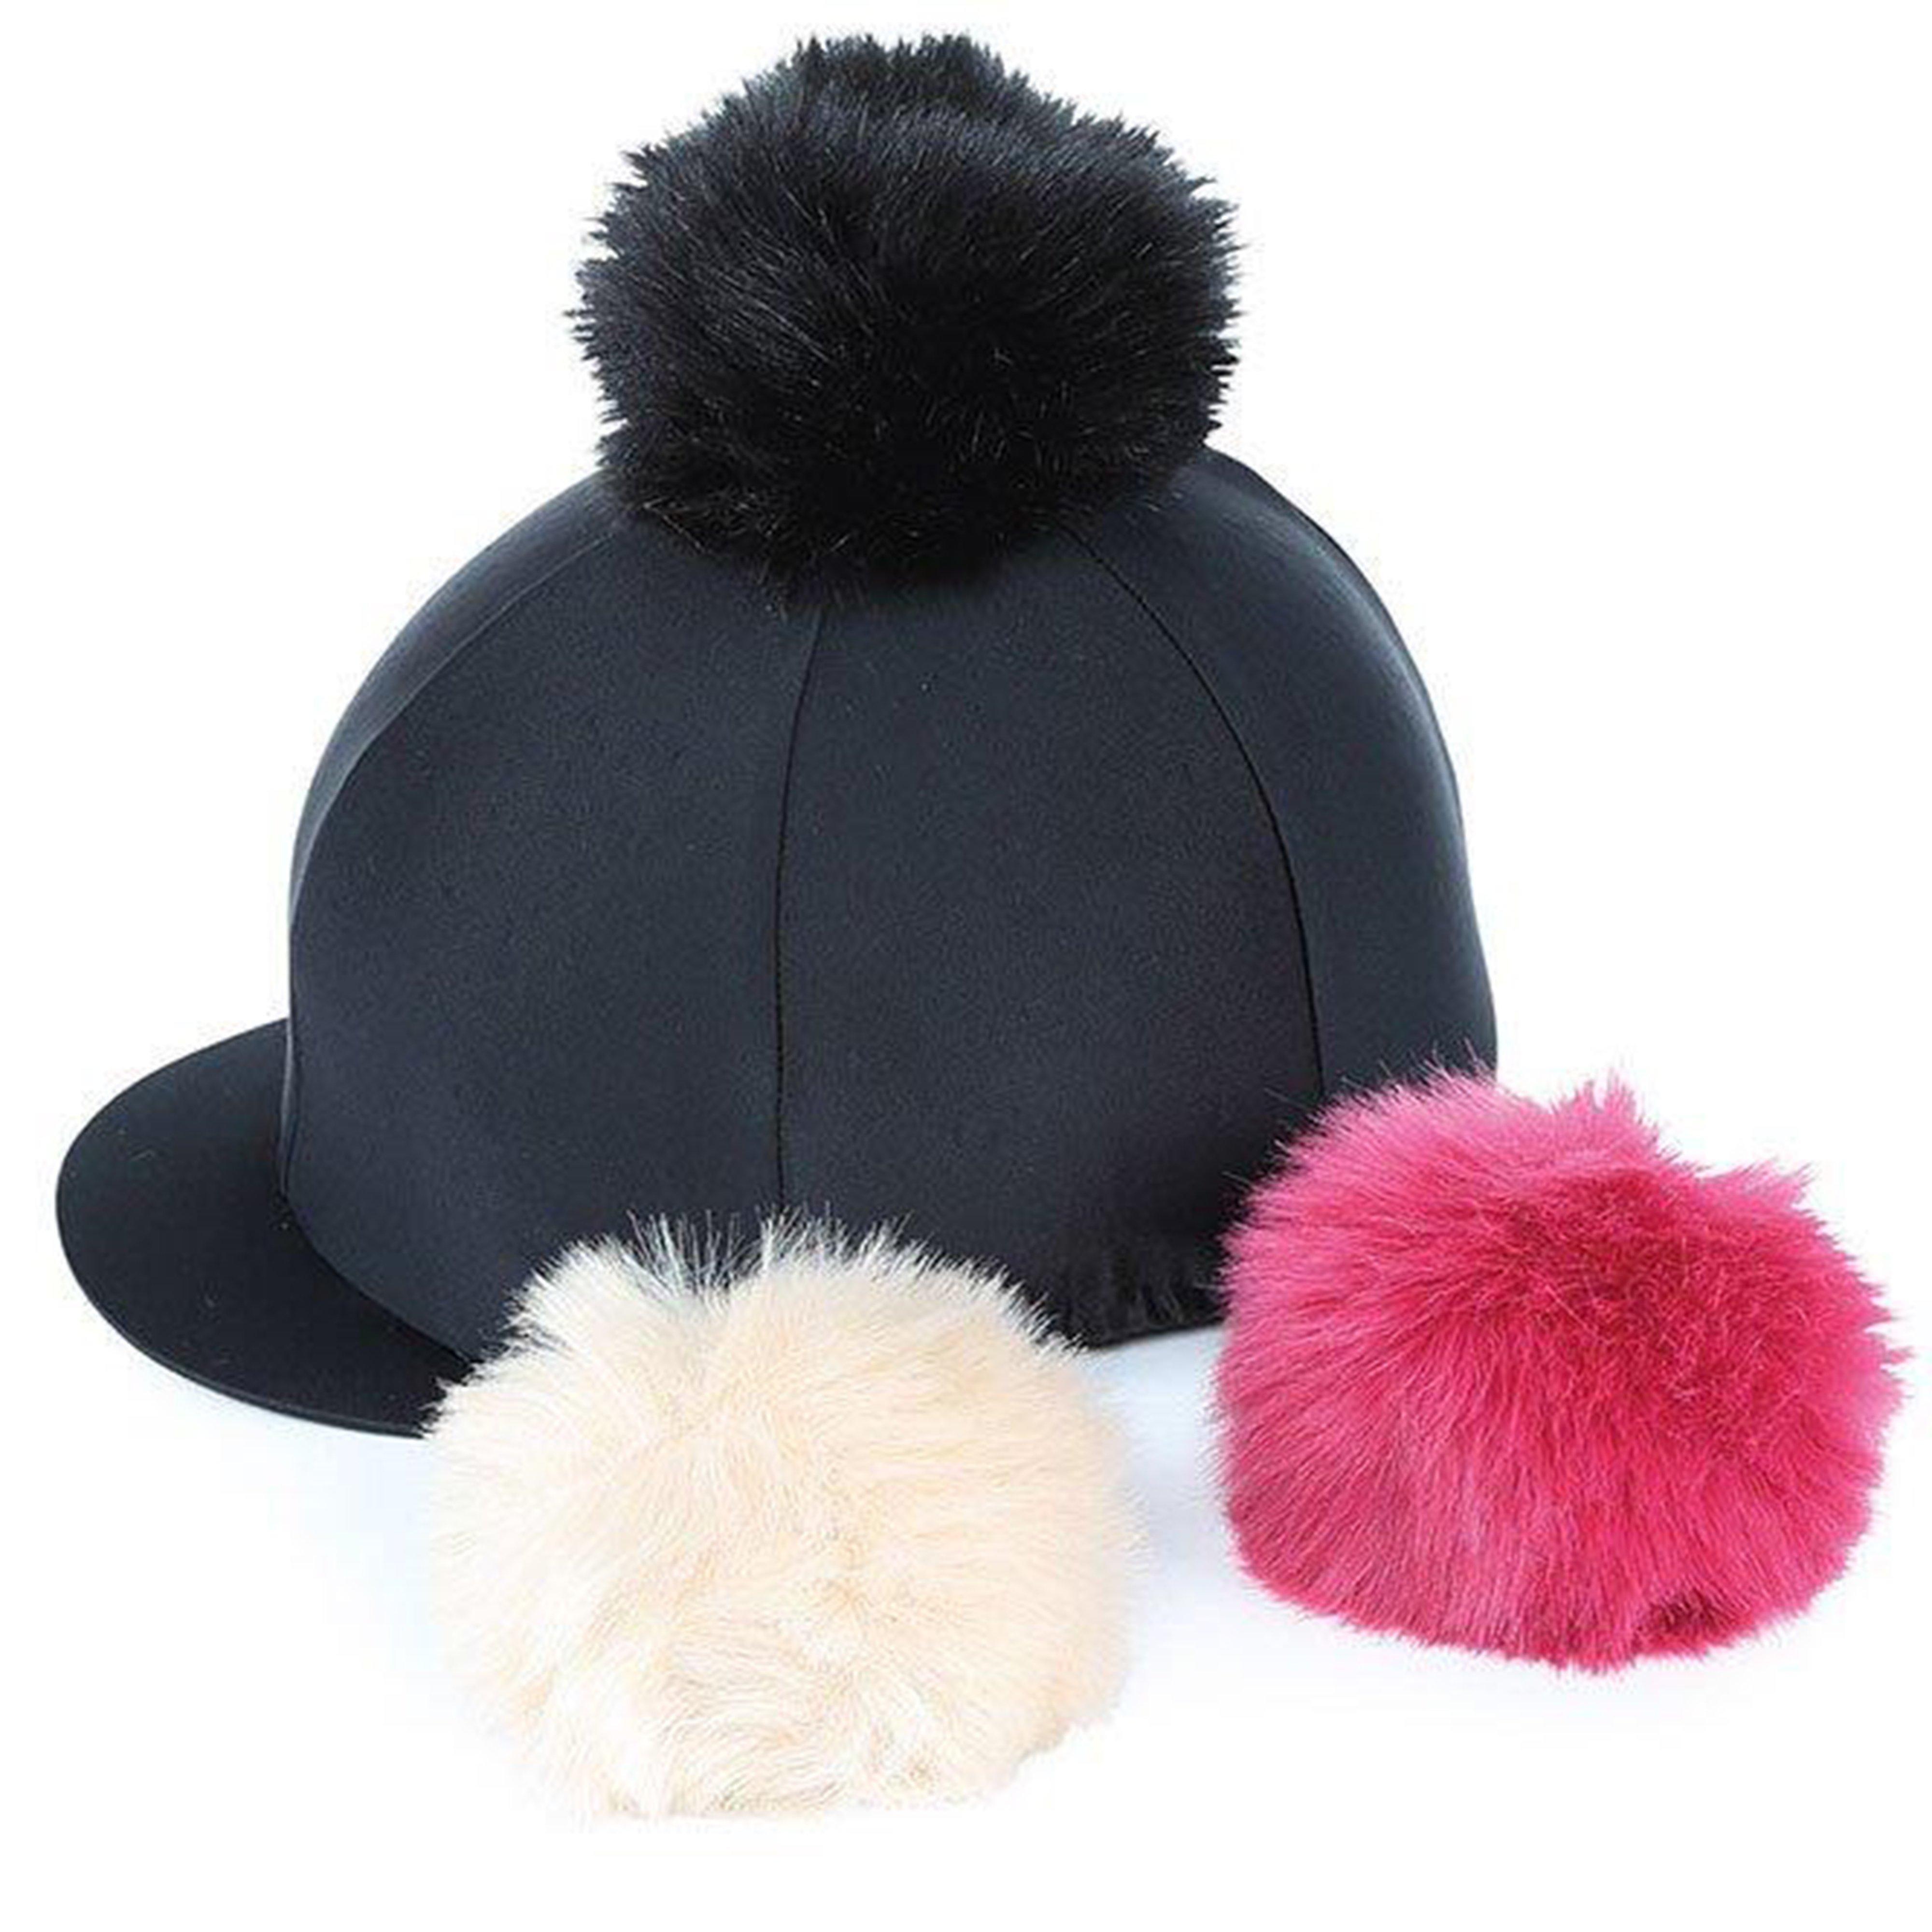 Shires Switch It Pom Pom Hat Cover Review